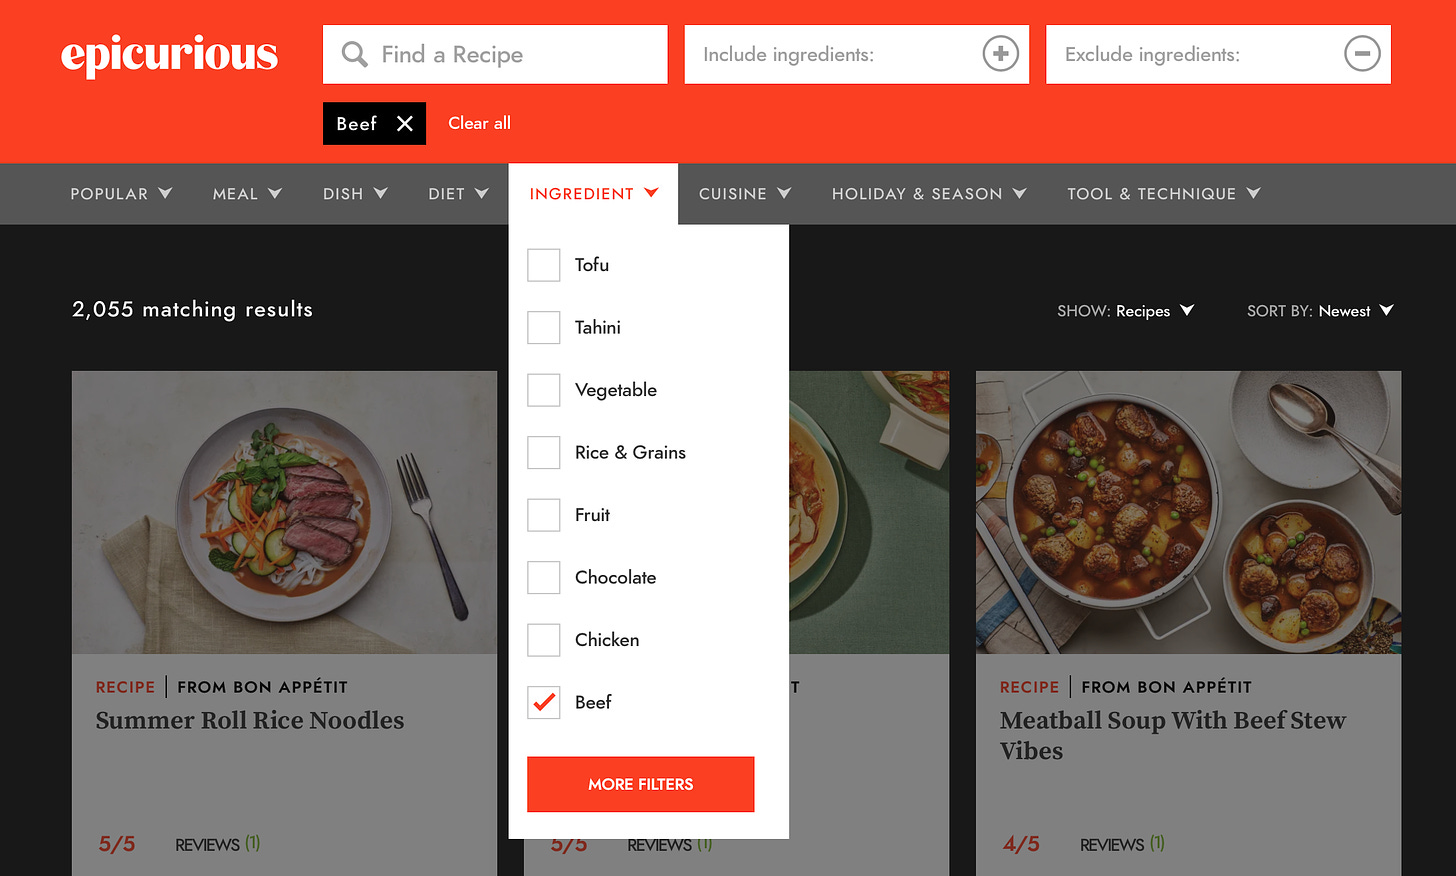 A screenshot of the Epicurious recipe search page. A red banner with the name Epicurious is at the top. A white drop-down menu that filters by ingredients covers the middle of the page, and there is  a checkmark next to the word “beef.” Behind the drop-down menu are three photos of recipes set against a black background. The recipe to the left says “summer roll rice noodles” with a photo of sliced steak, carrot slivers, and snap peas on a white plate, with a metal fork to the right. The recipe on the right says “meatball stew with beef soup vibes” and has a photo of two white bowls of meatball soup, with a spoon on the right. The drop-down menu covers the middle recipe.